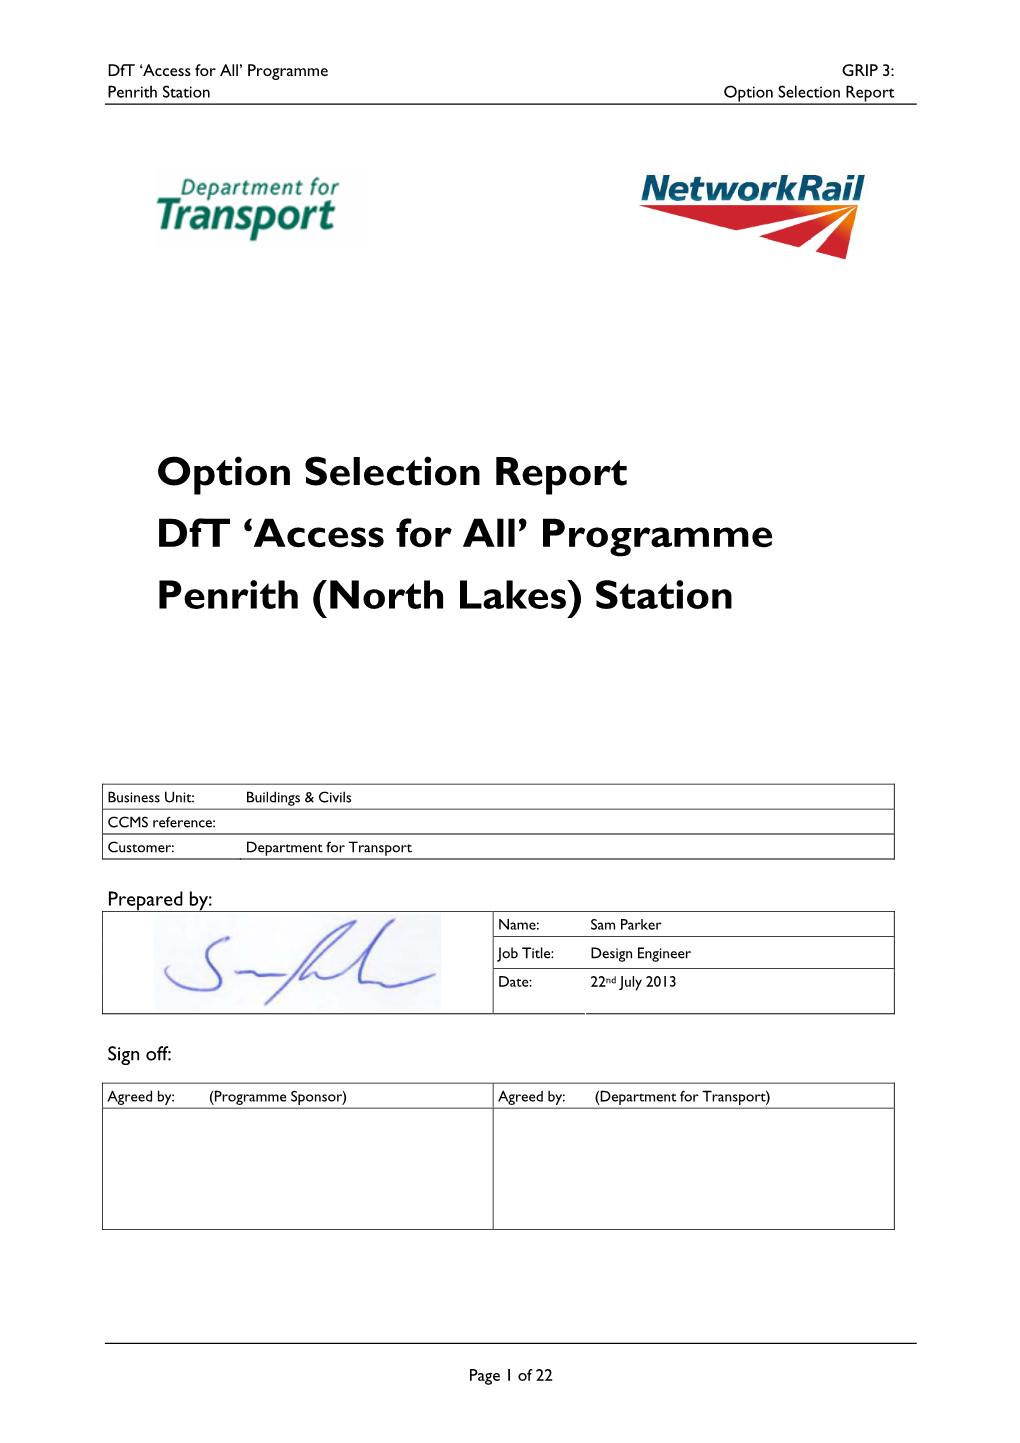 Option Selection Report Dft 'Access for All' Programme Penrith